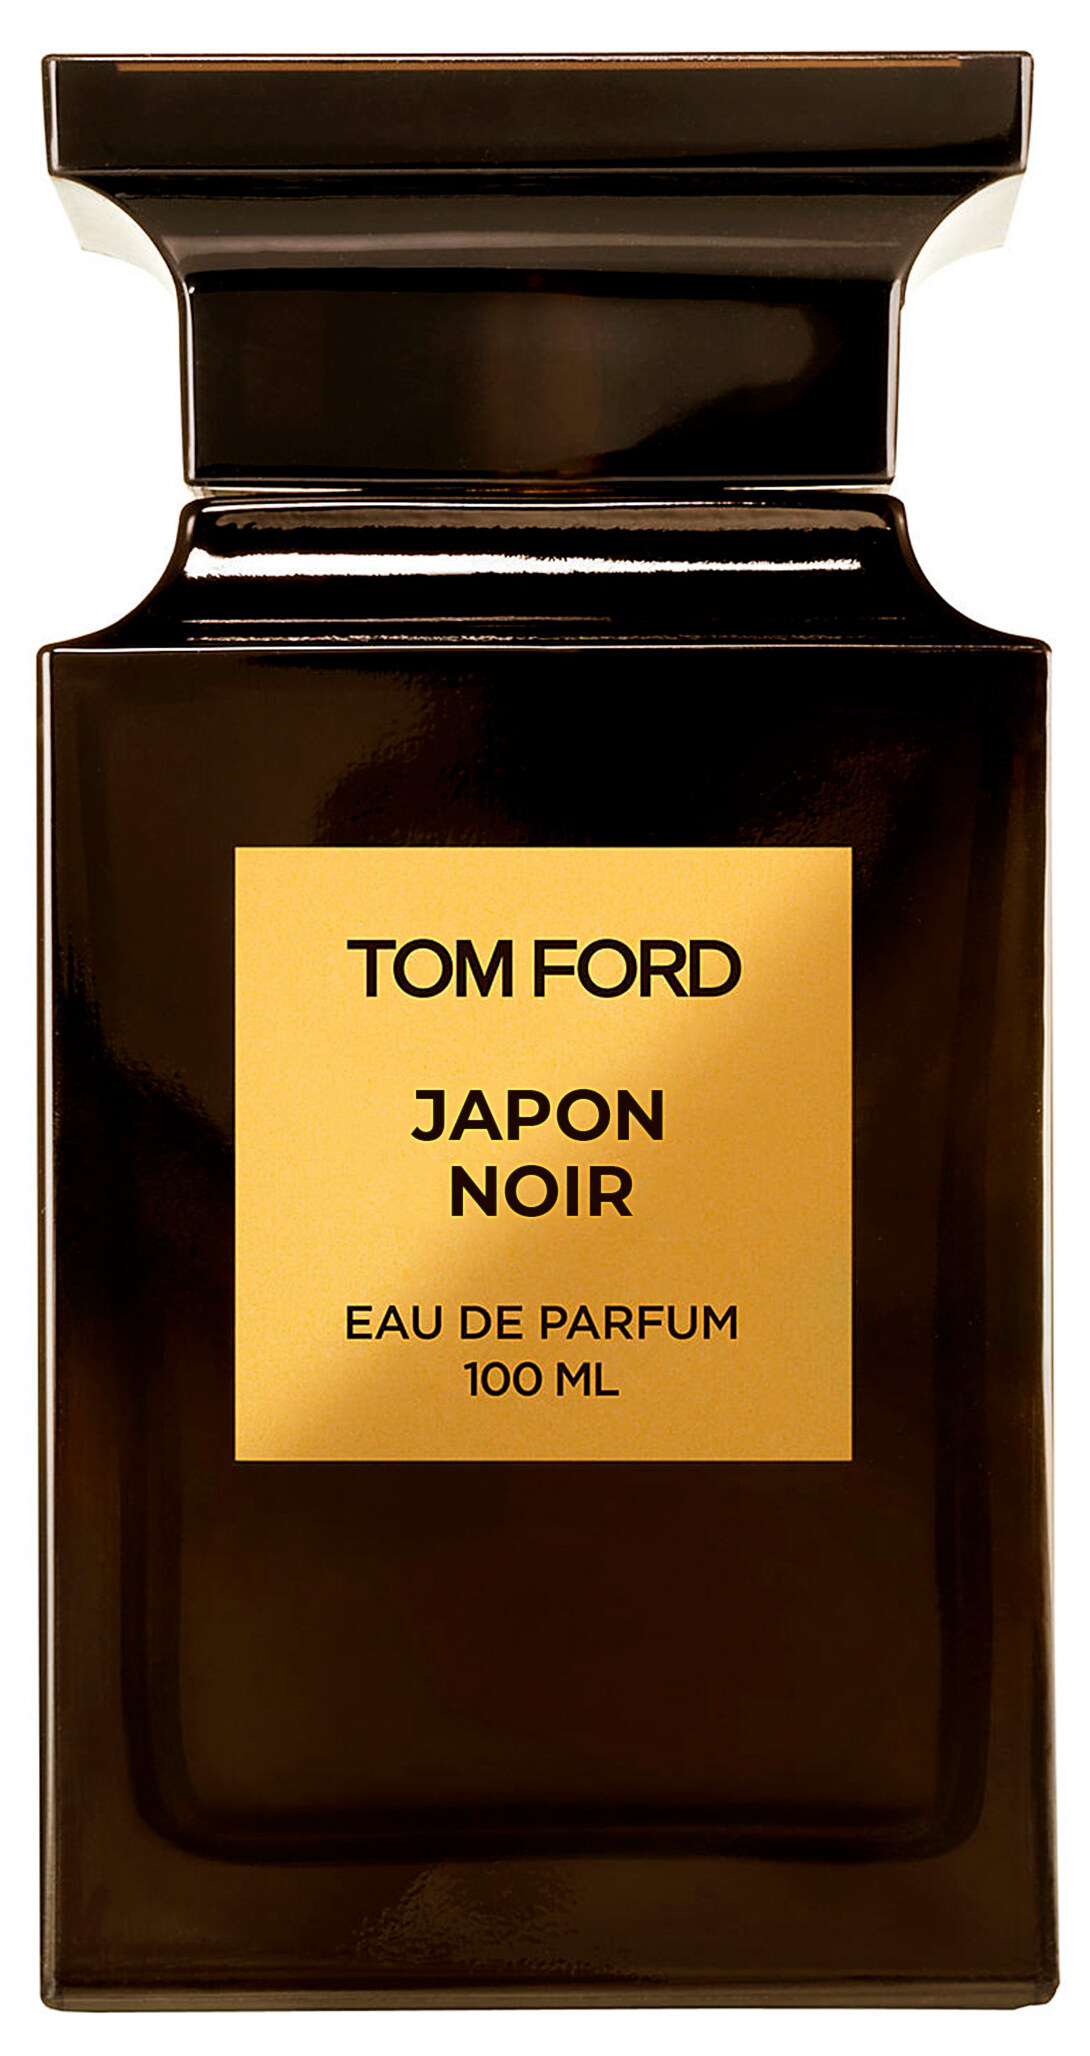 Japon Noir by Tom Ford » Reviews & Perfume Facts